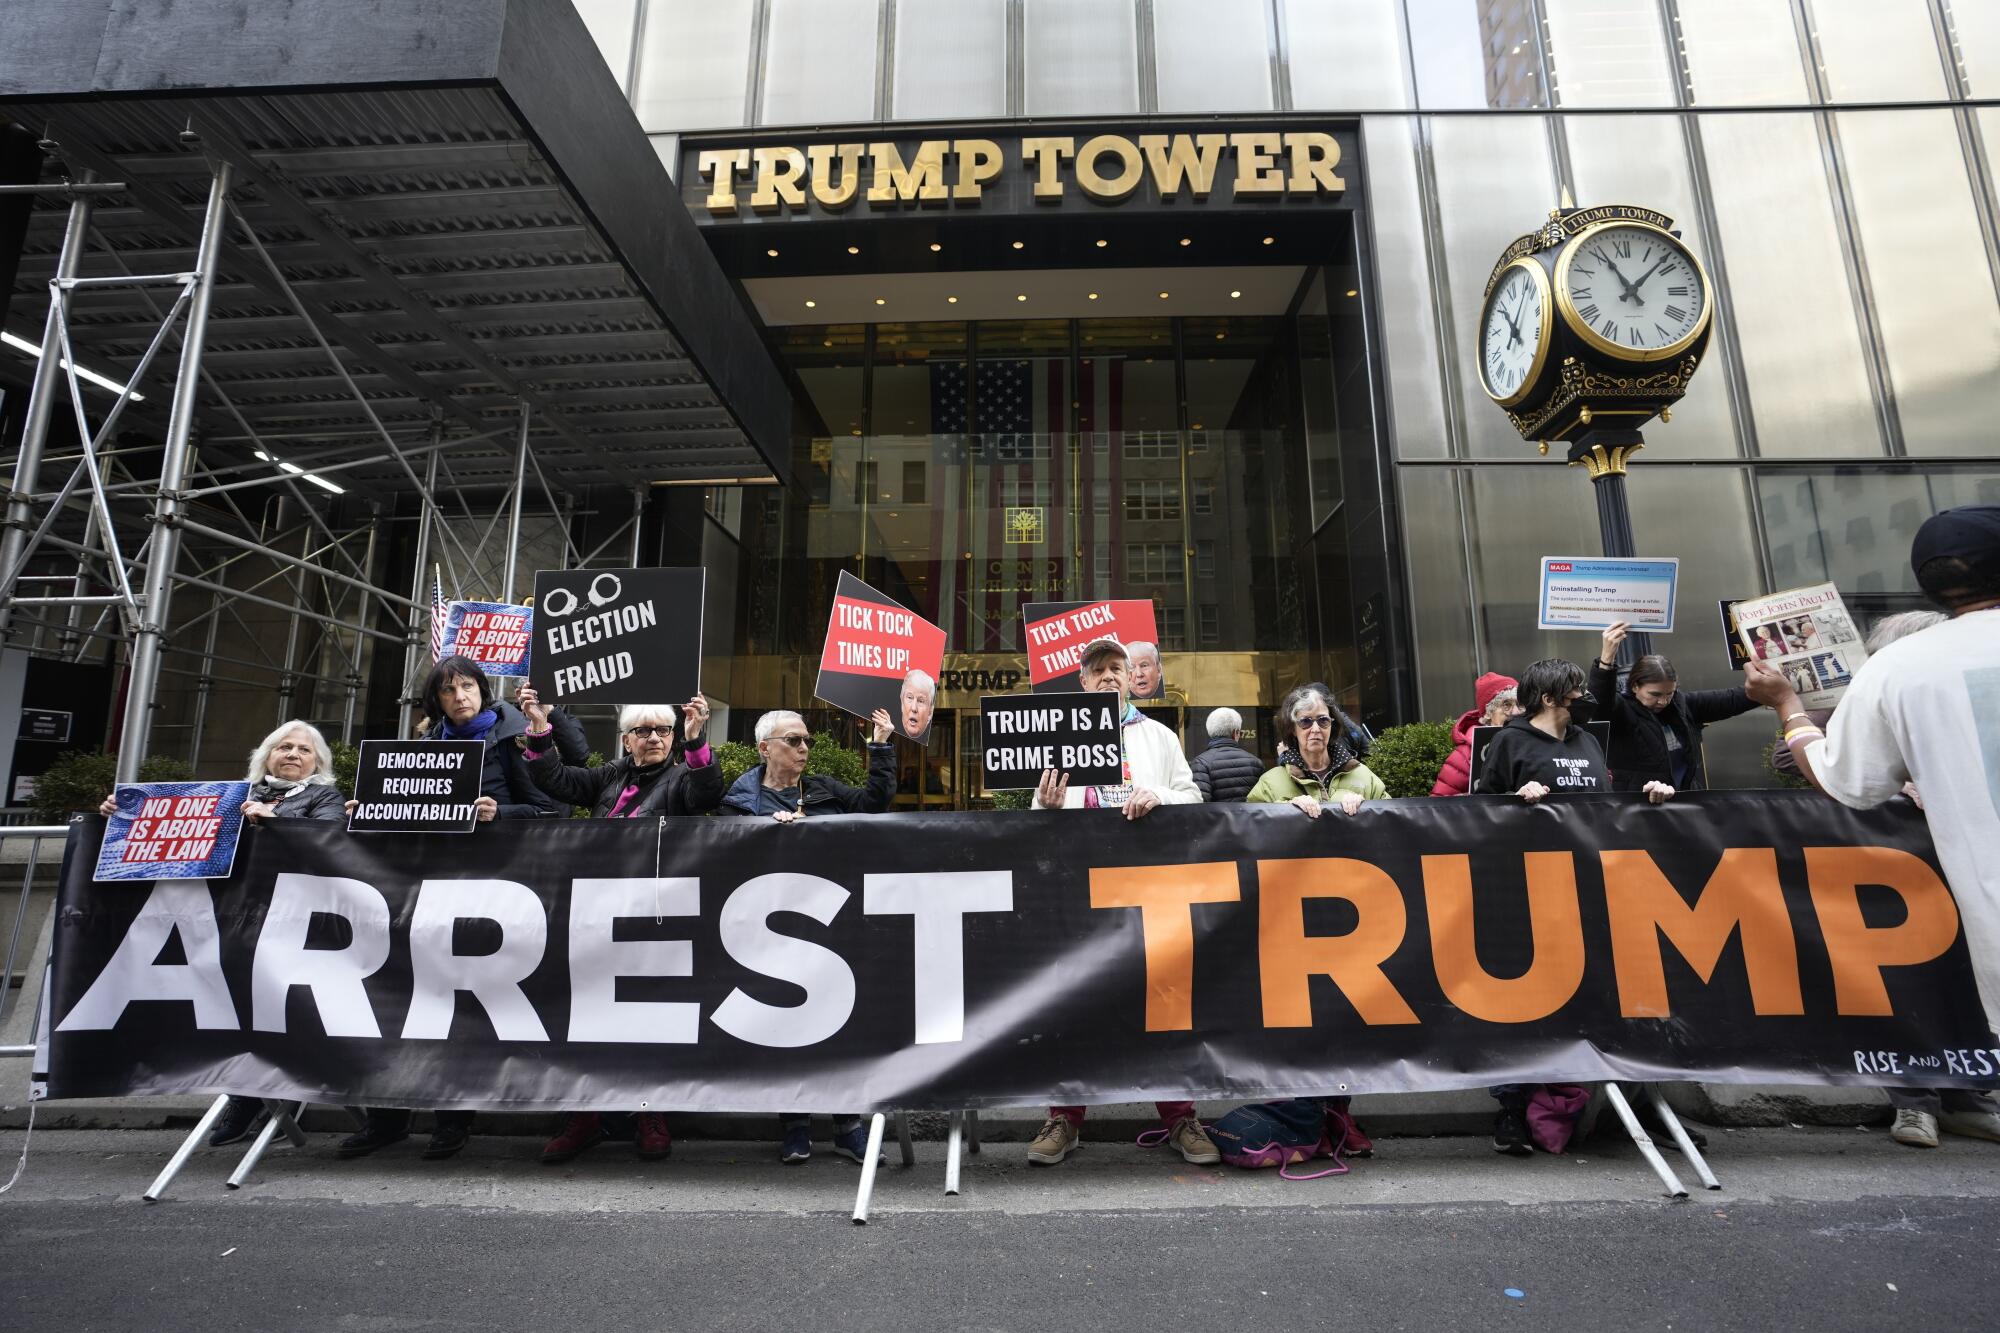 Protesters outside Trump Tower hold a large banner that reads, "Arrest Trump."